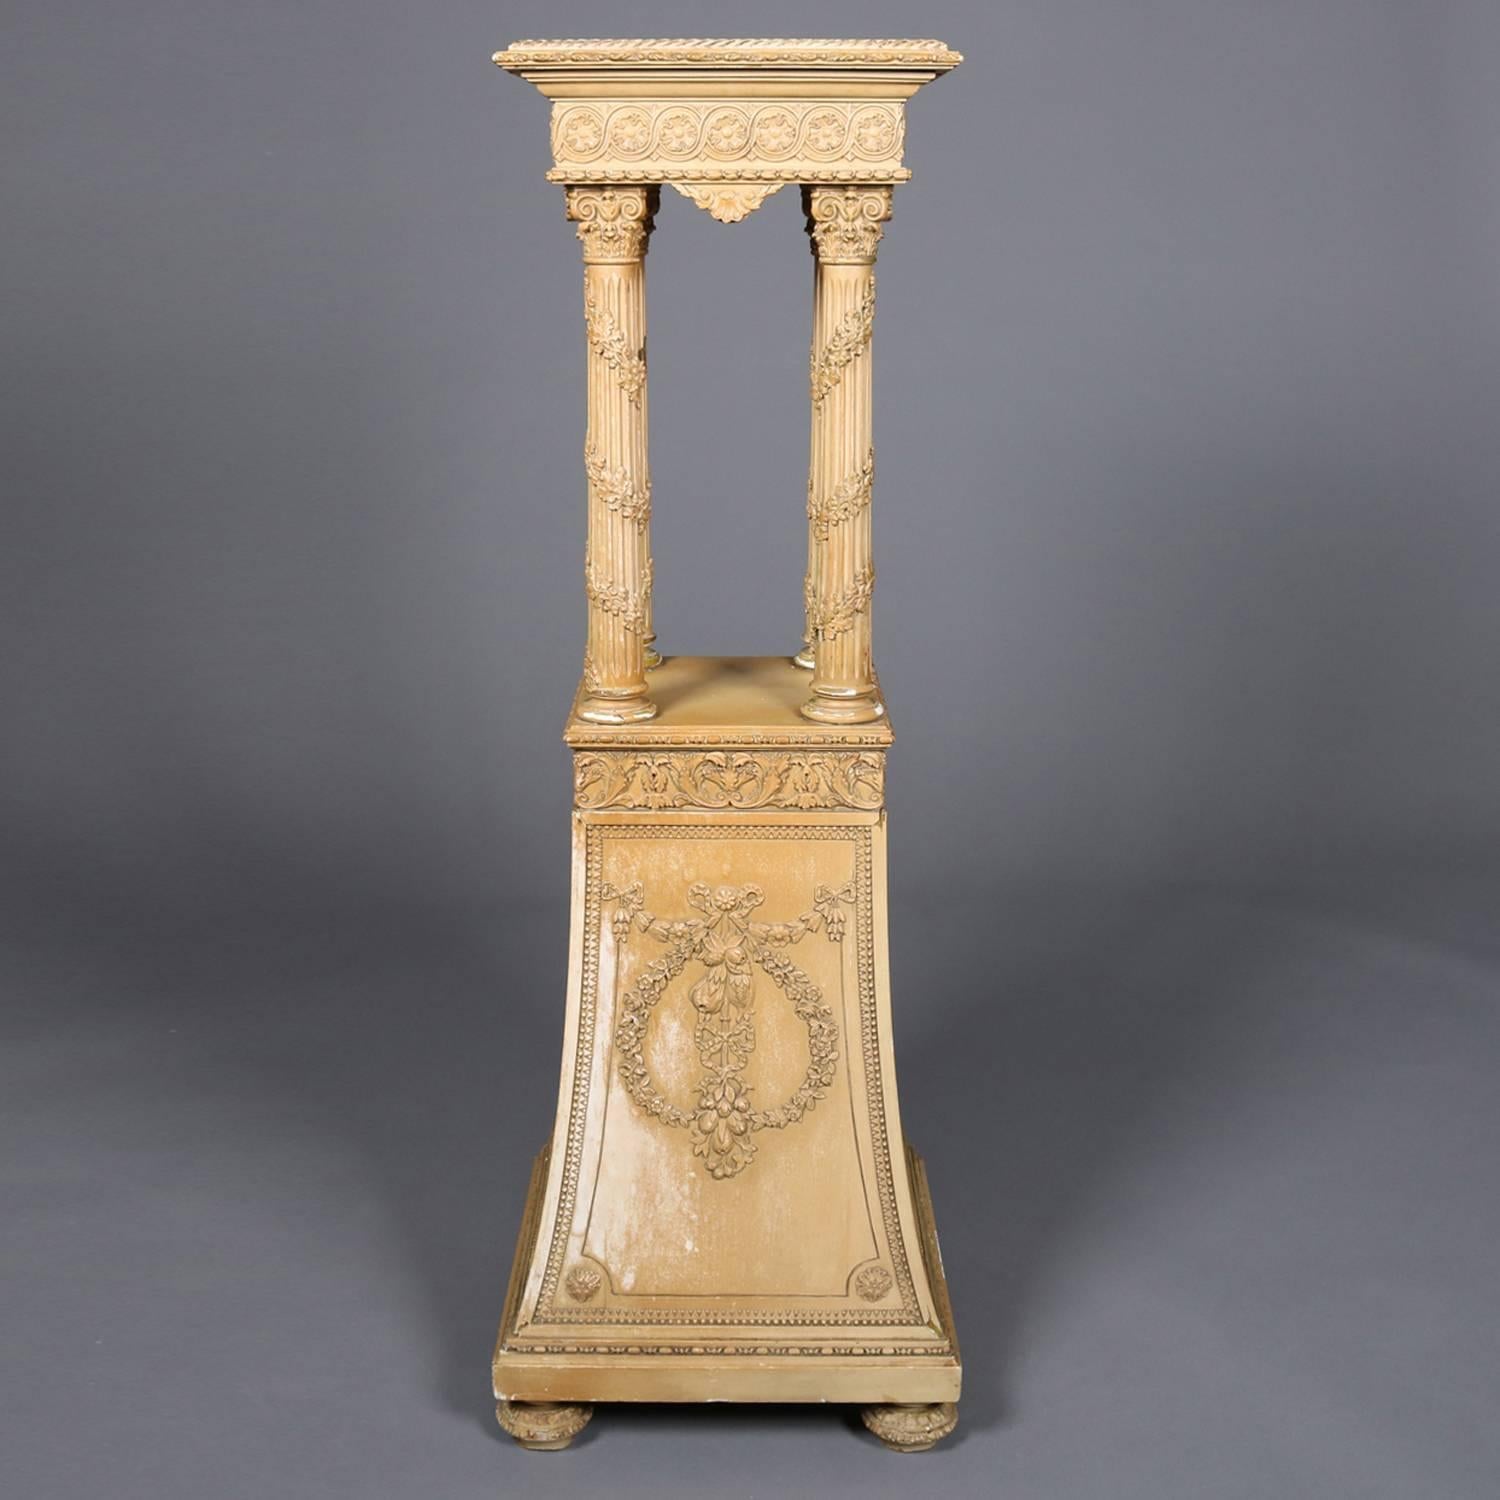 Antique French Louis XV style painted carved wood and gesso sculpture stand features display raised on garland wrapped Corinthian column supports atop flared plinth with garland foliate wreath reserves, circa 1900

Measures: 45